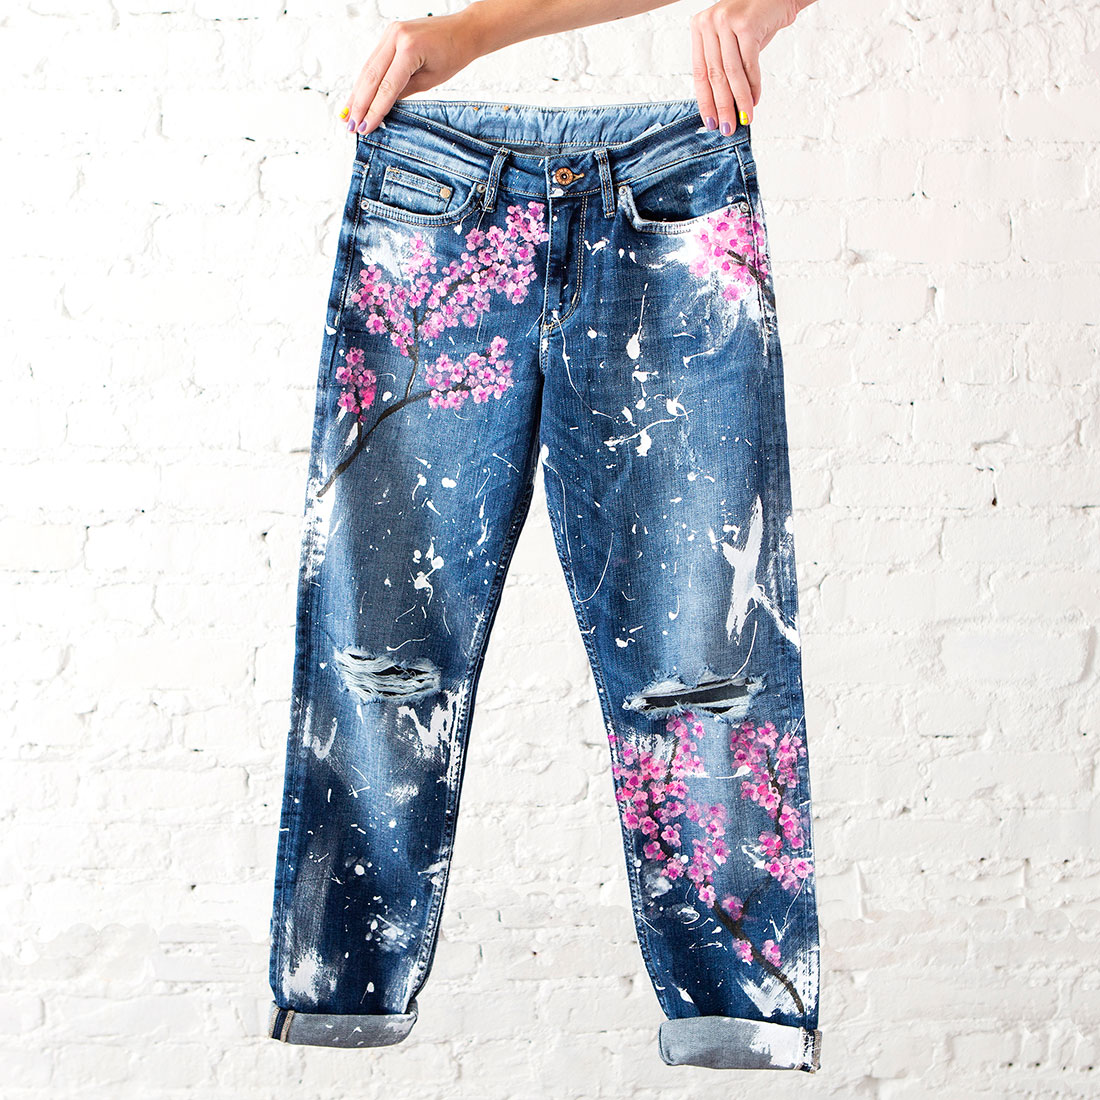 Paint Your Own Cherry Blossom Jeans Tutorial